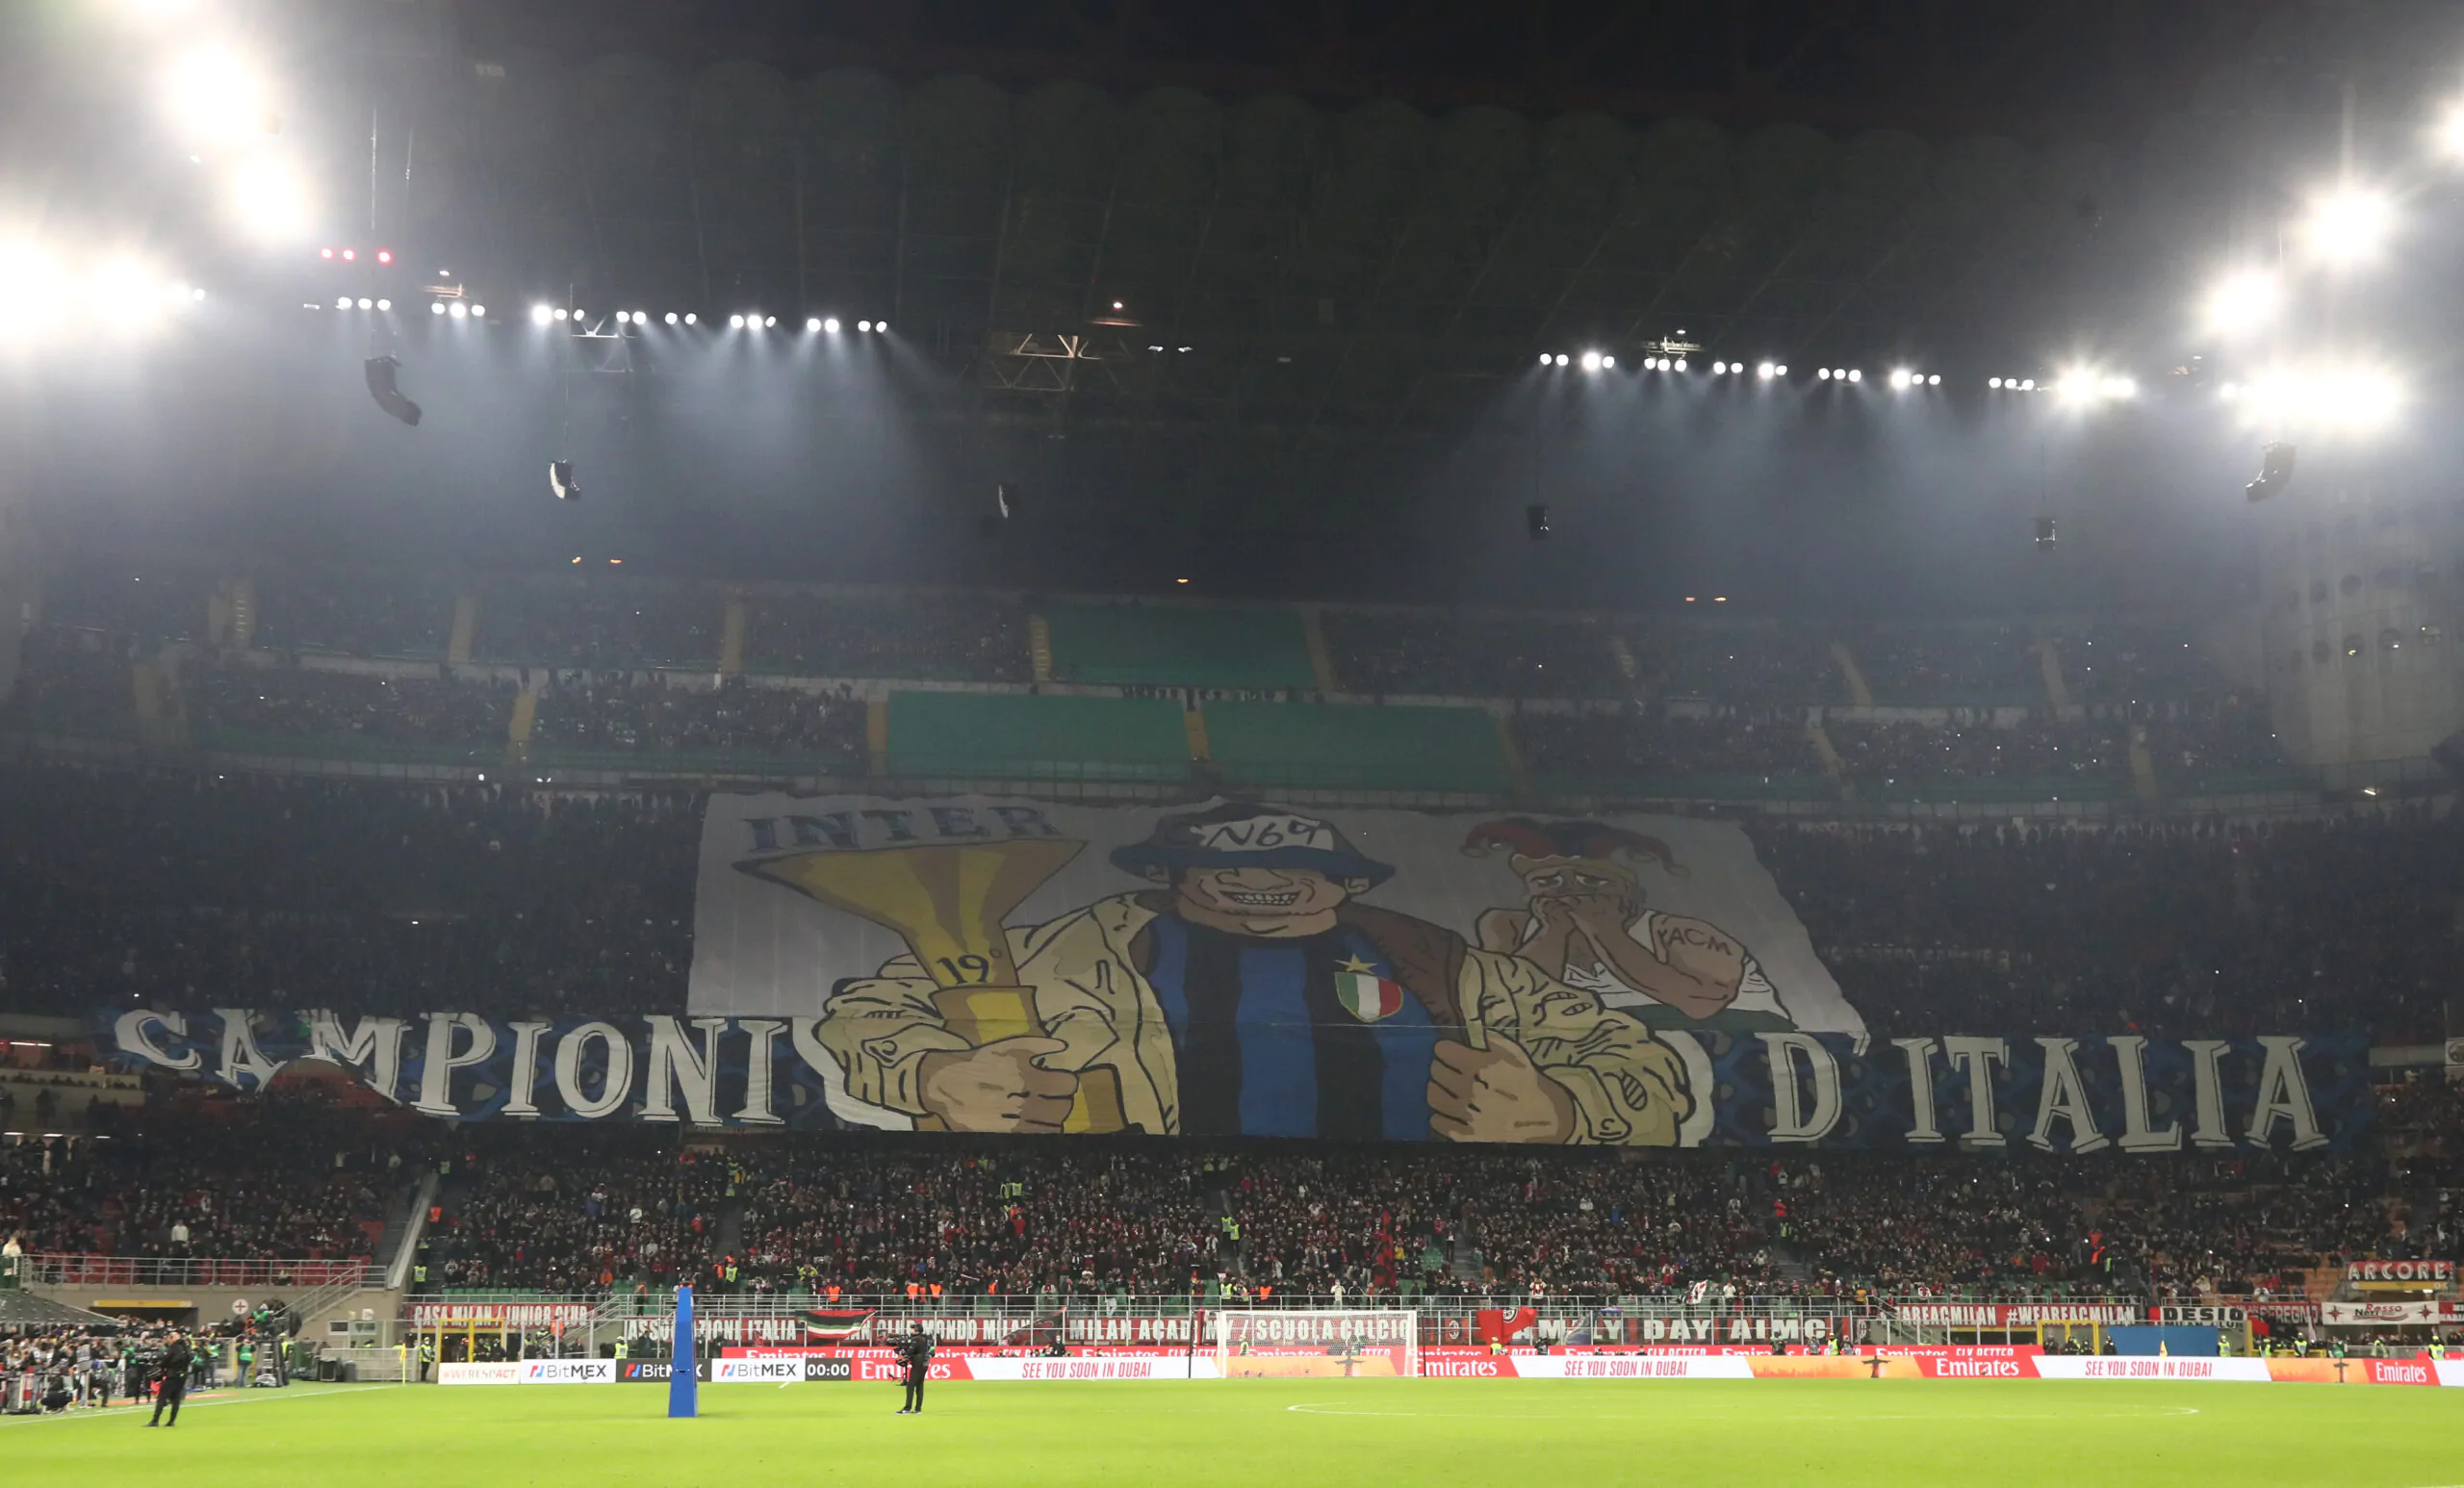 San Siro’s Curva Nord will not make the trip to Turin for the clash between Juventus and Inter this Sunday as a form of protest.